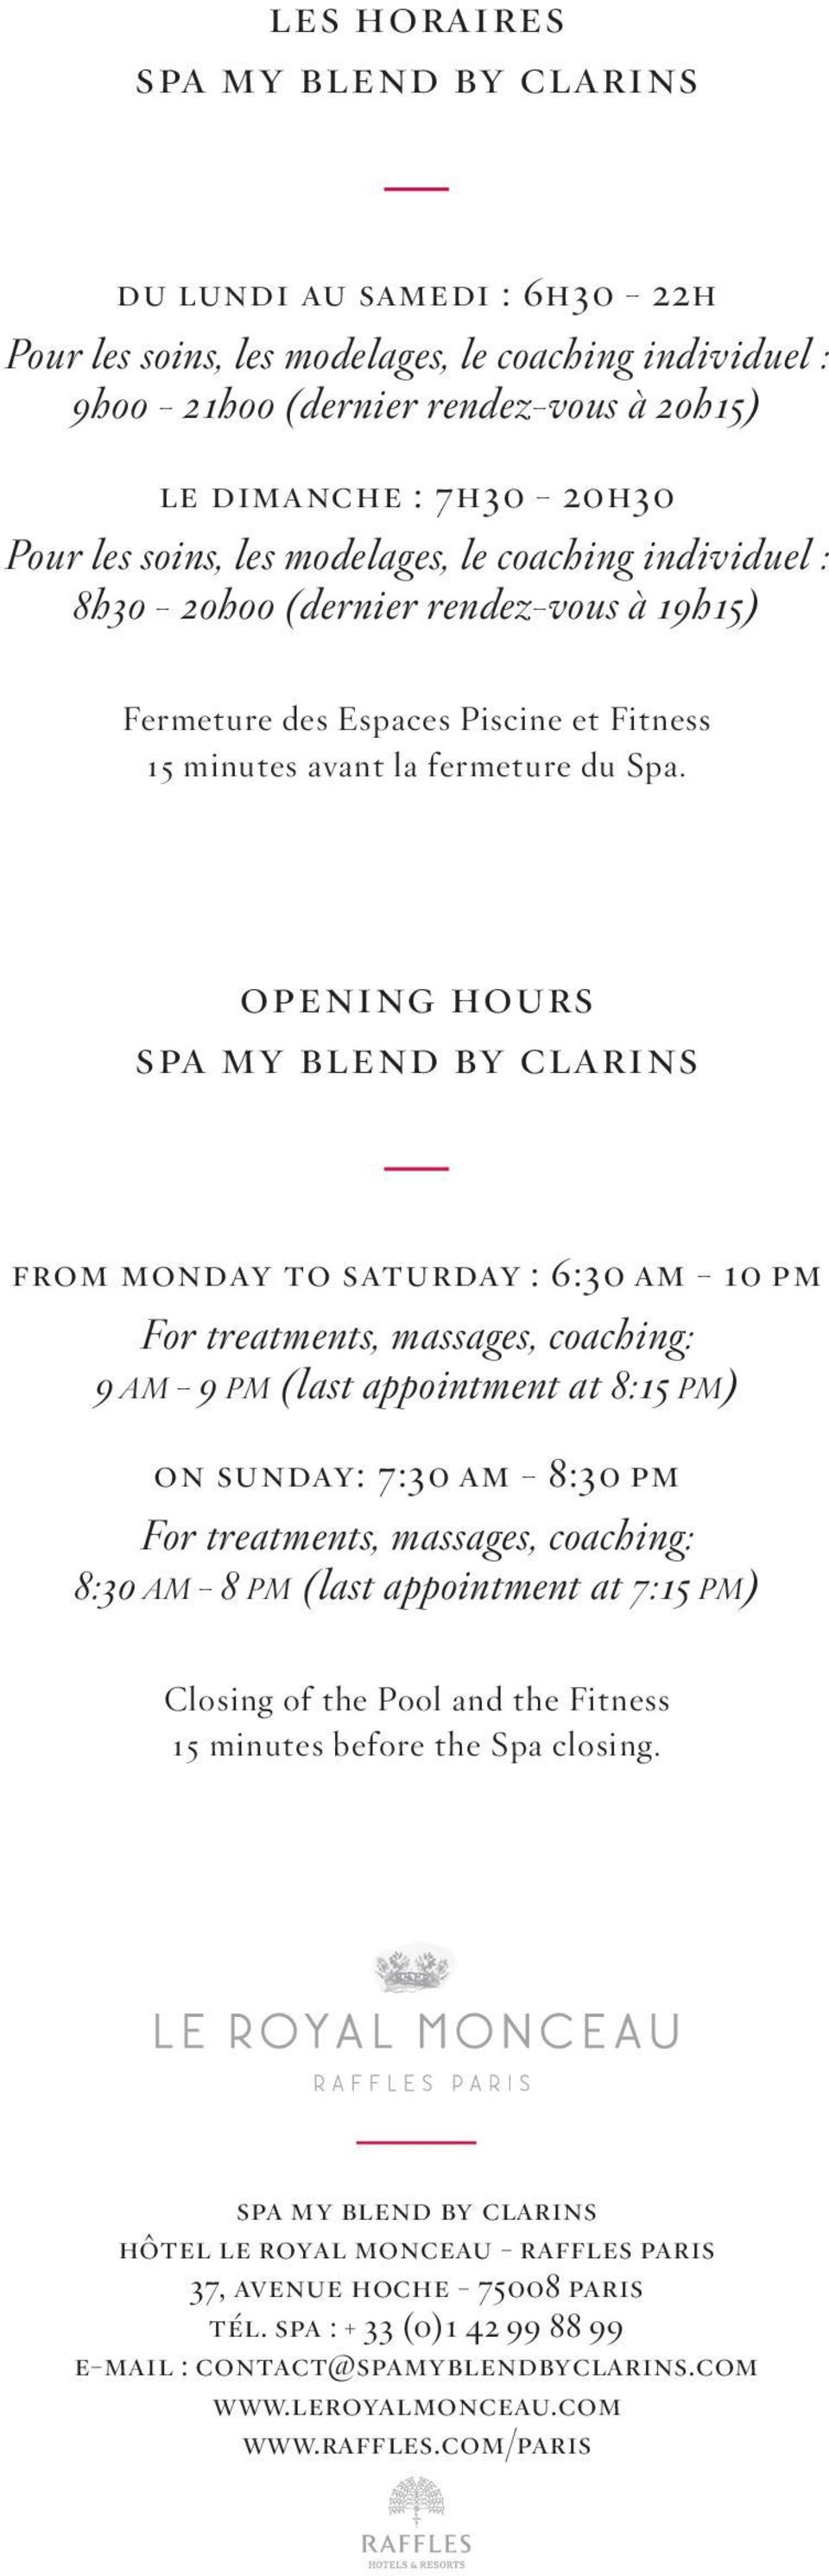 opening hours spa my blend by clarins from monday to saturday : 6:30 am - 10 pm For treatments, massages, coaching: 9 am - 9 pm (last appointment at 8:15 pm) on sunday: 7:30 am - 8:30 pm For